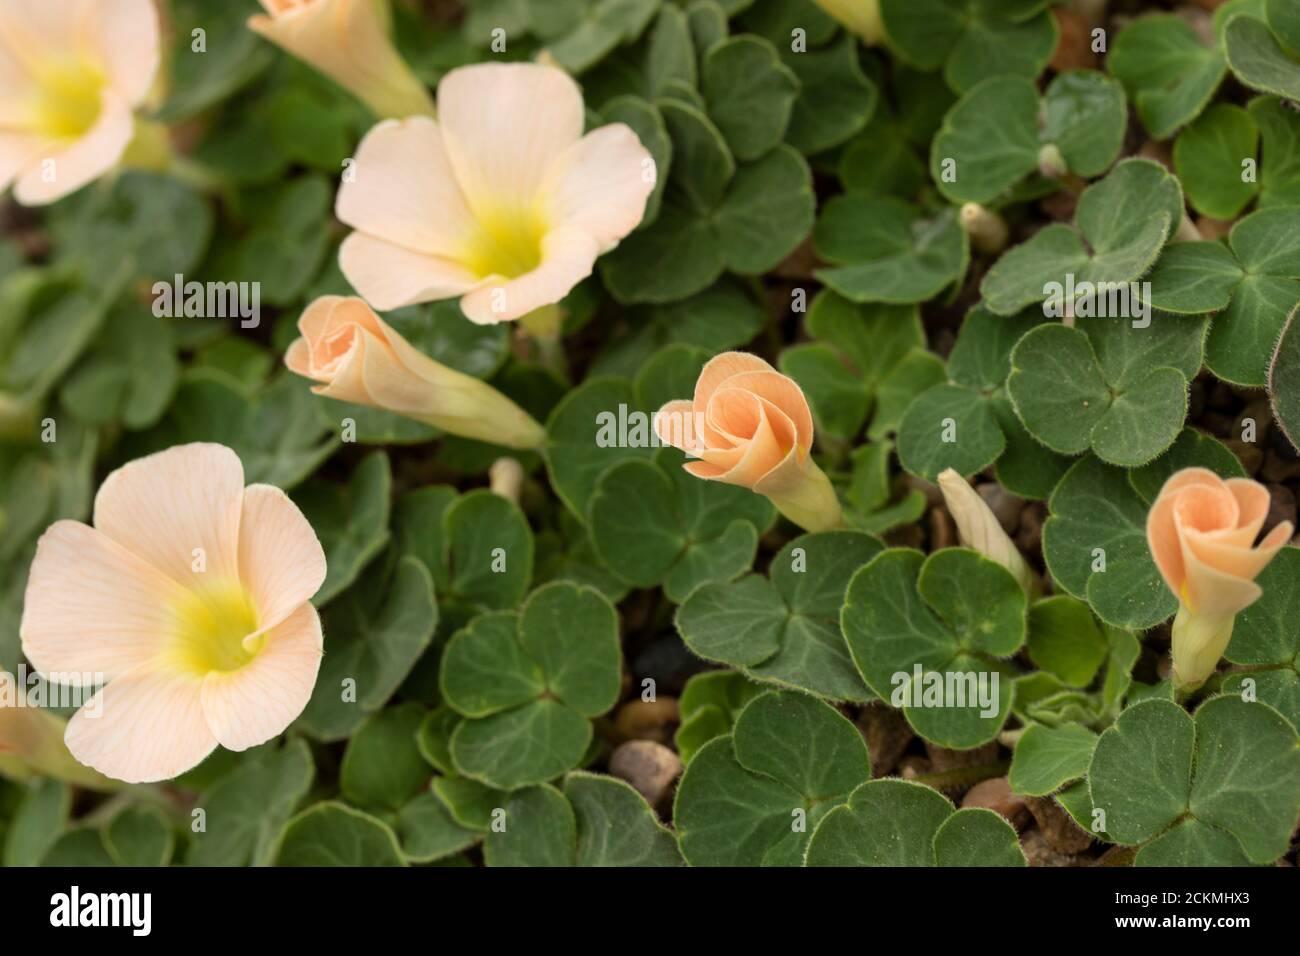 Oxalis Pulchella var Tomentosa flowers and foliage, nature close-up portrait Stock Photo